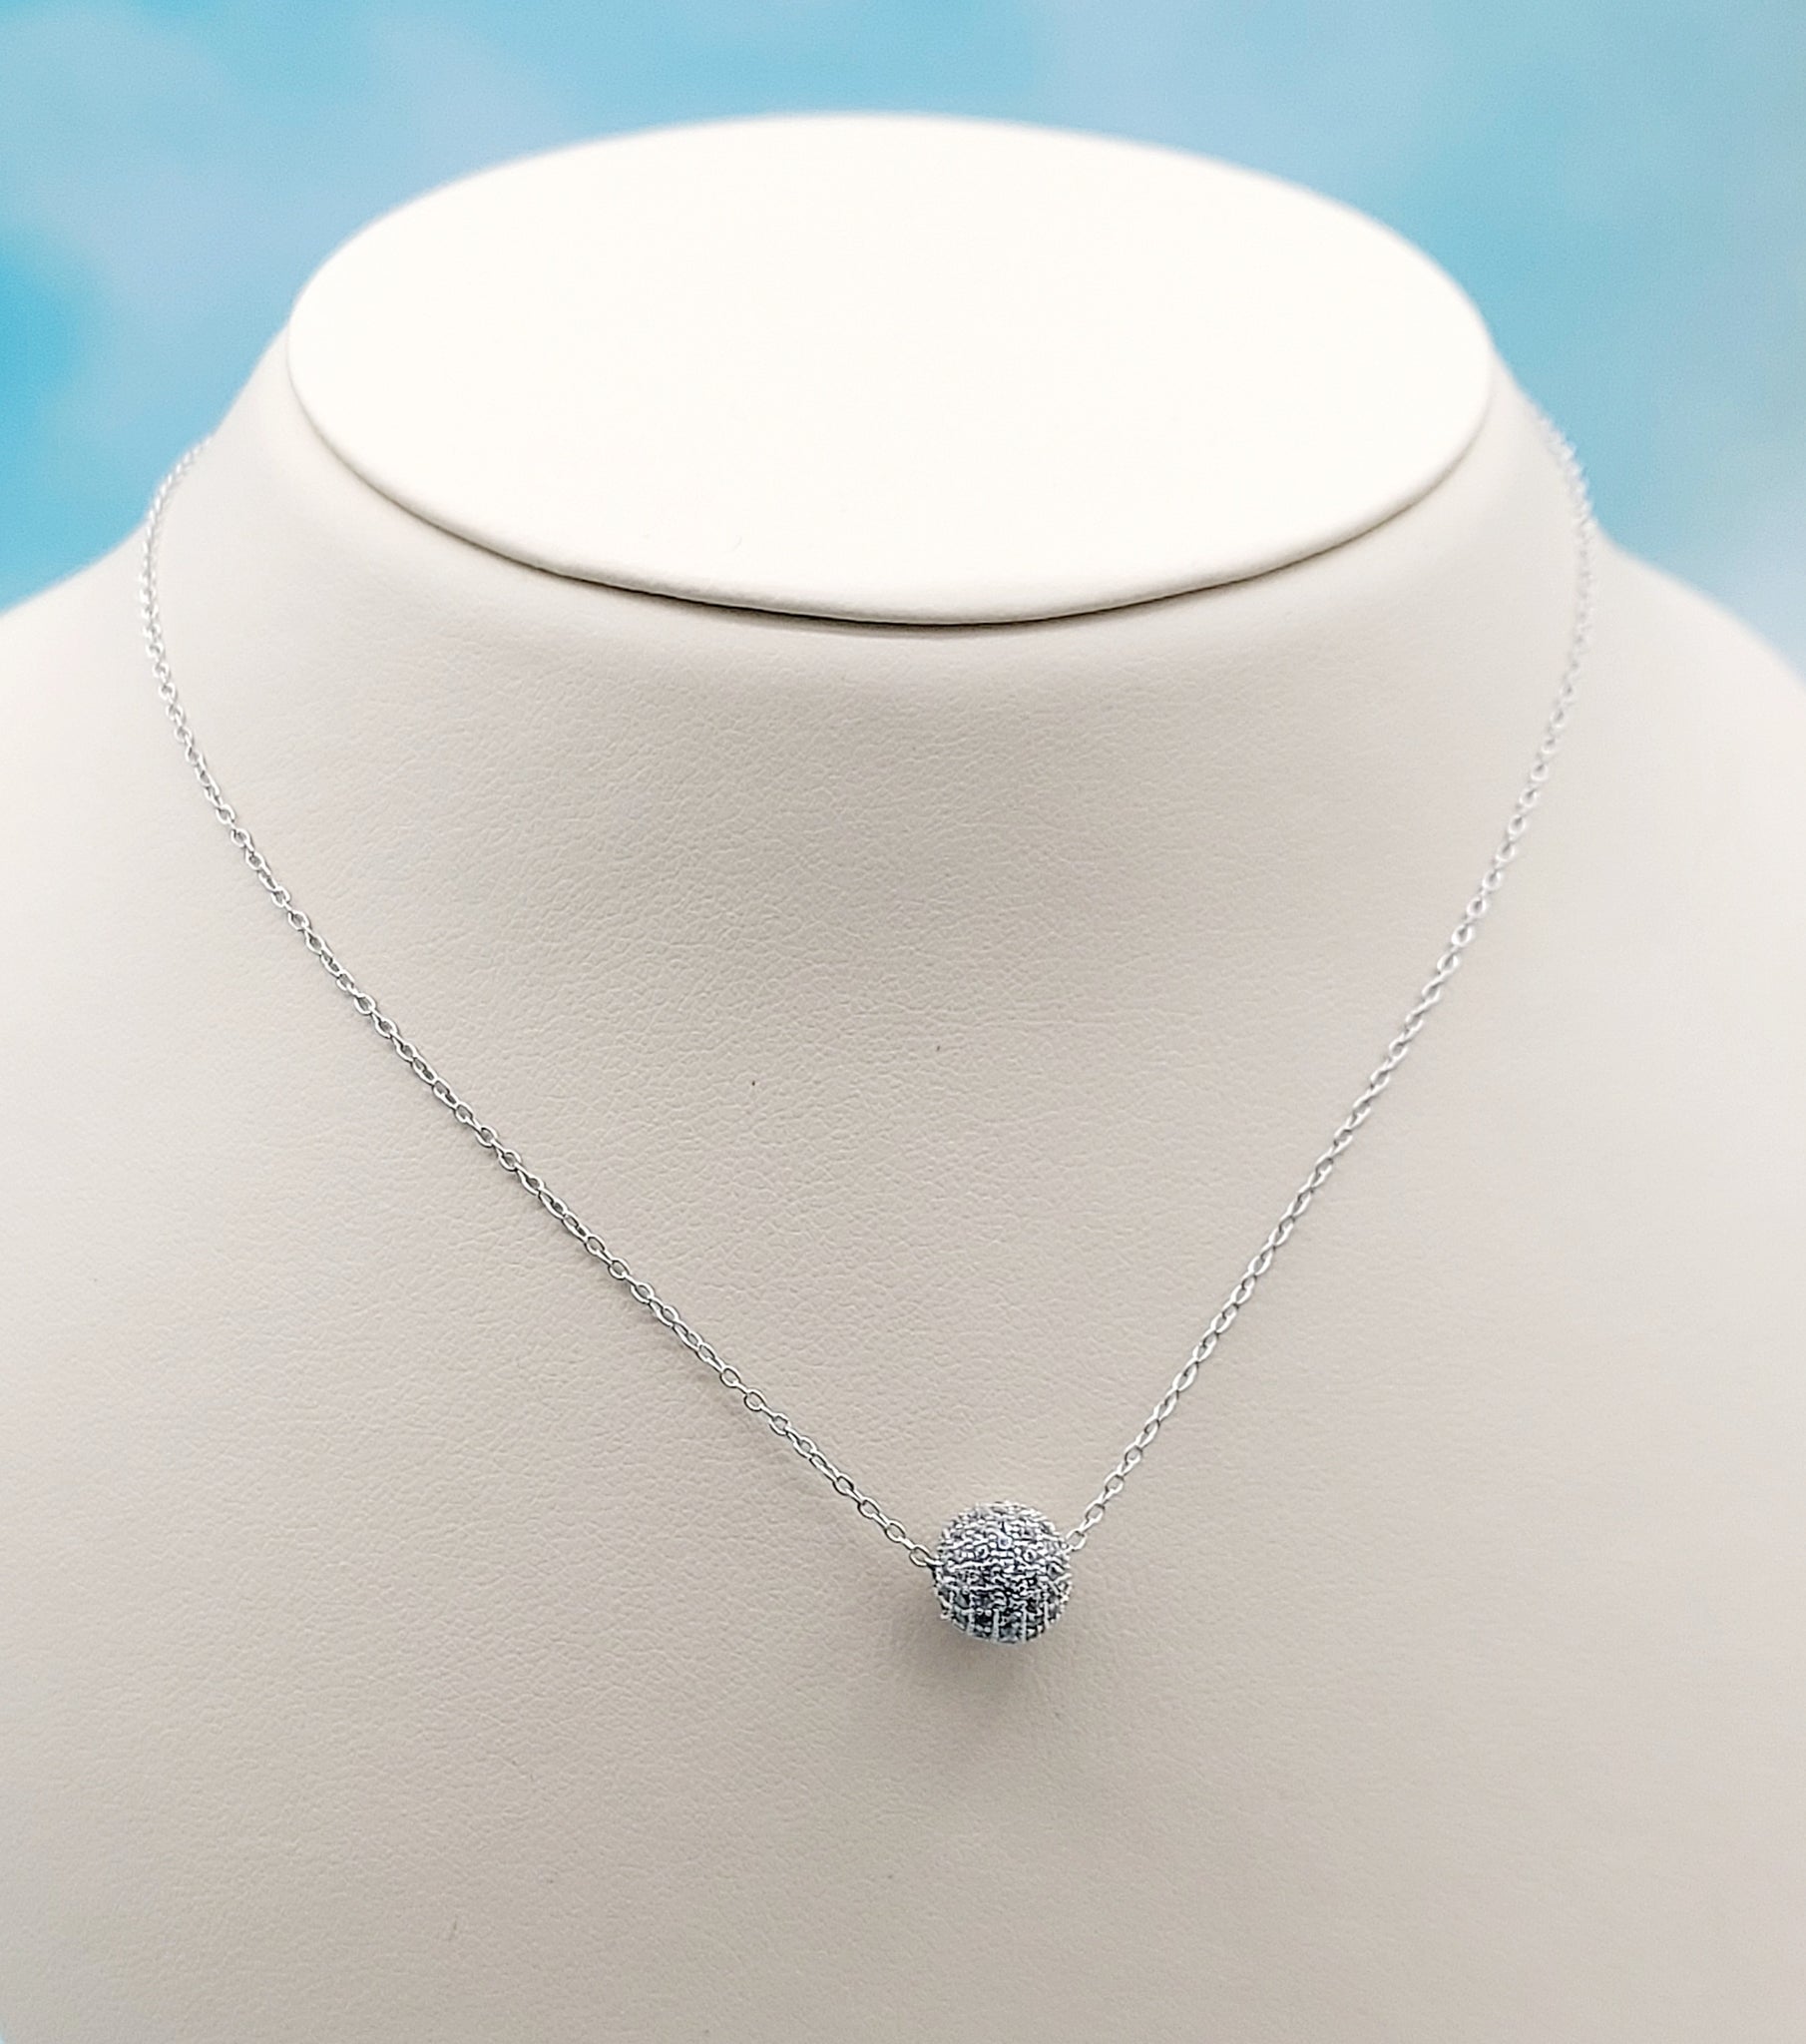 Buy Silver Sterling Necklace With 1 Diamond Ball Bead Minimalist Necklace  Minimalist Choker Silver Choker Balls Necklace Online in India - Etsy